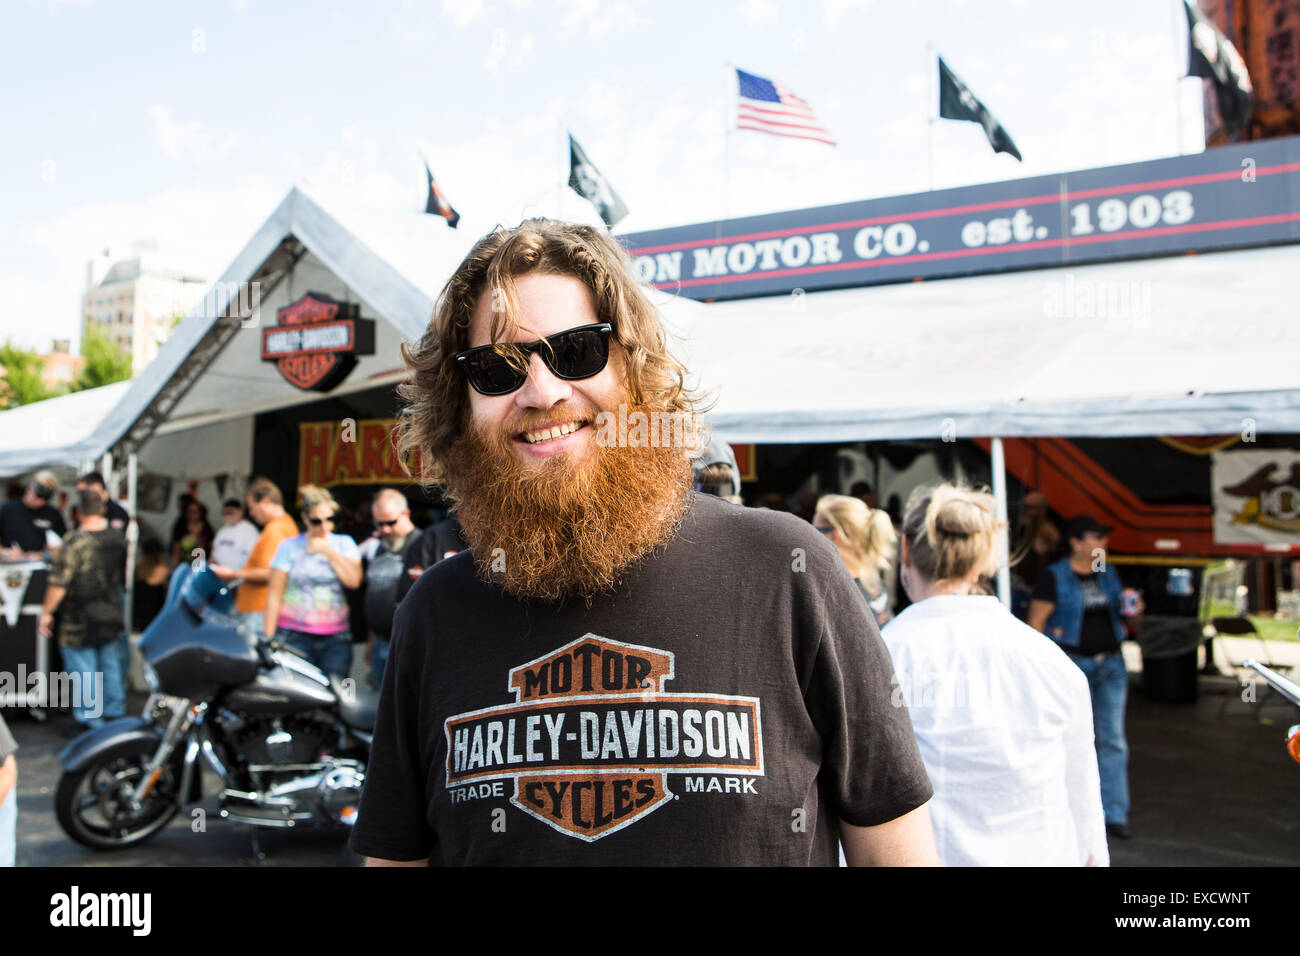 Harley Davidson T Shirt High Resolution Stock Photography and Images - Alamy